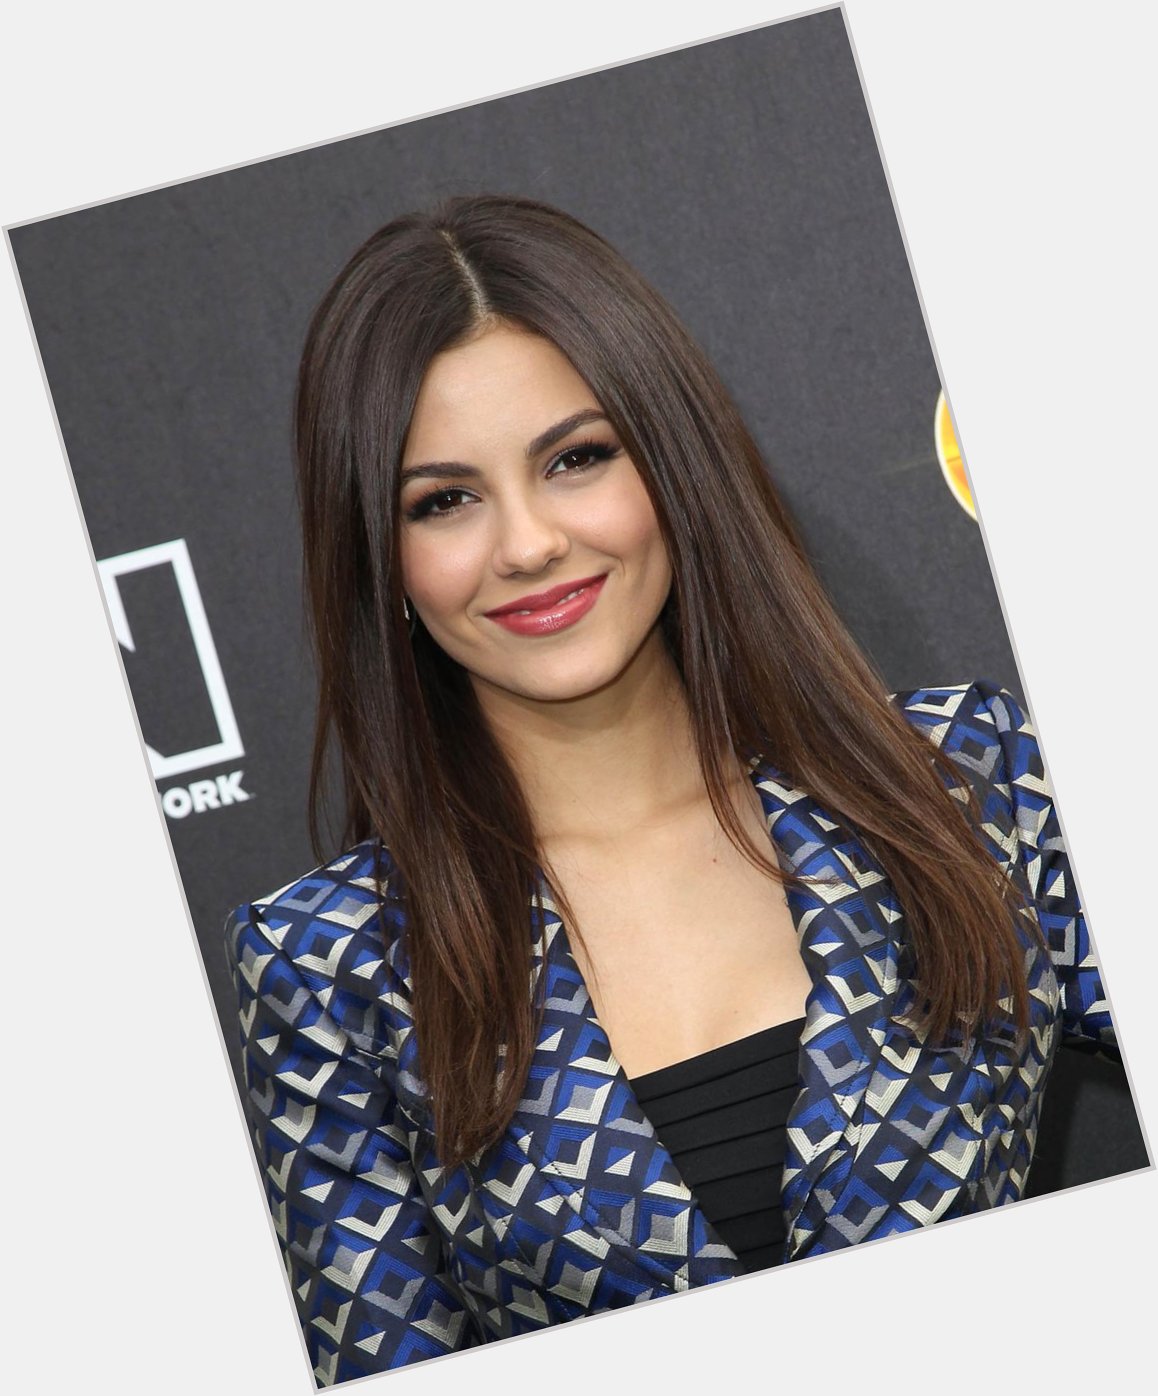 Happy Birthday to the gorgeous Victoria Justice, who is 22 today!  